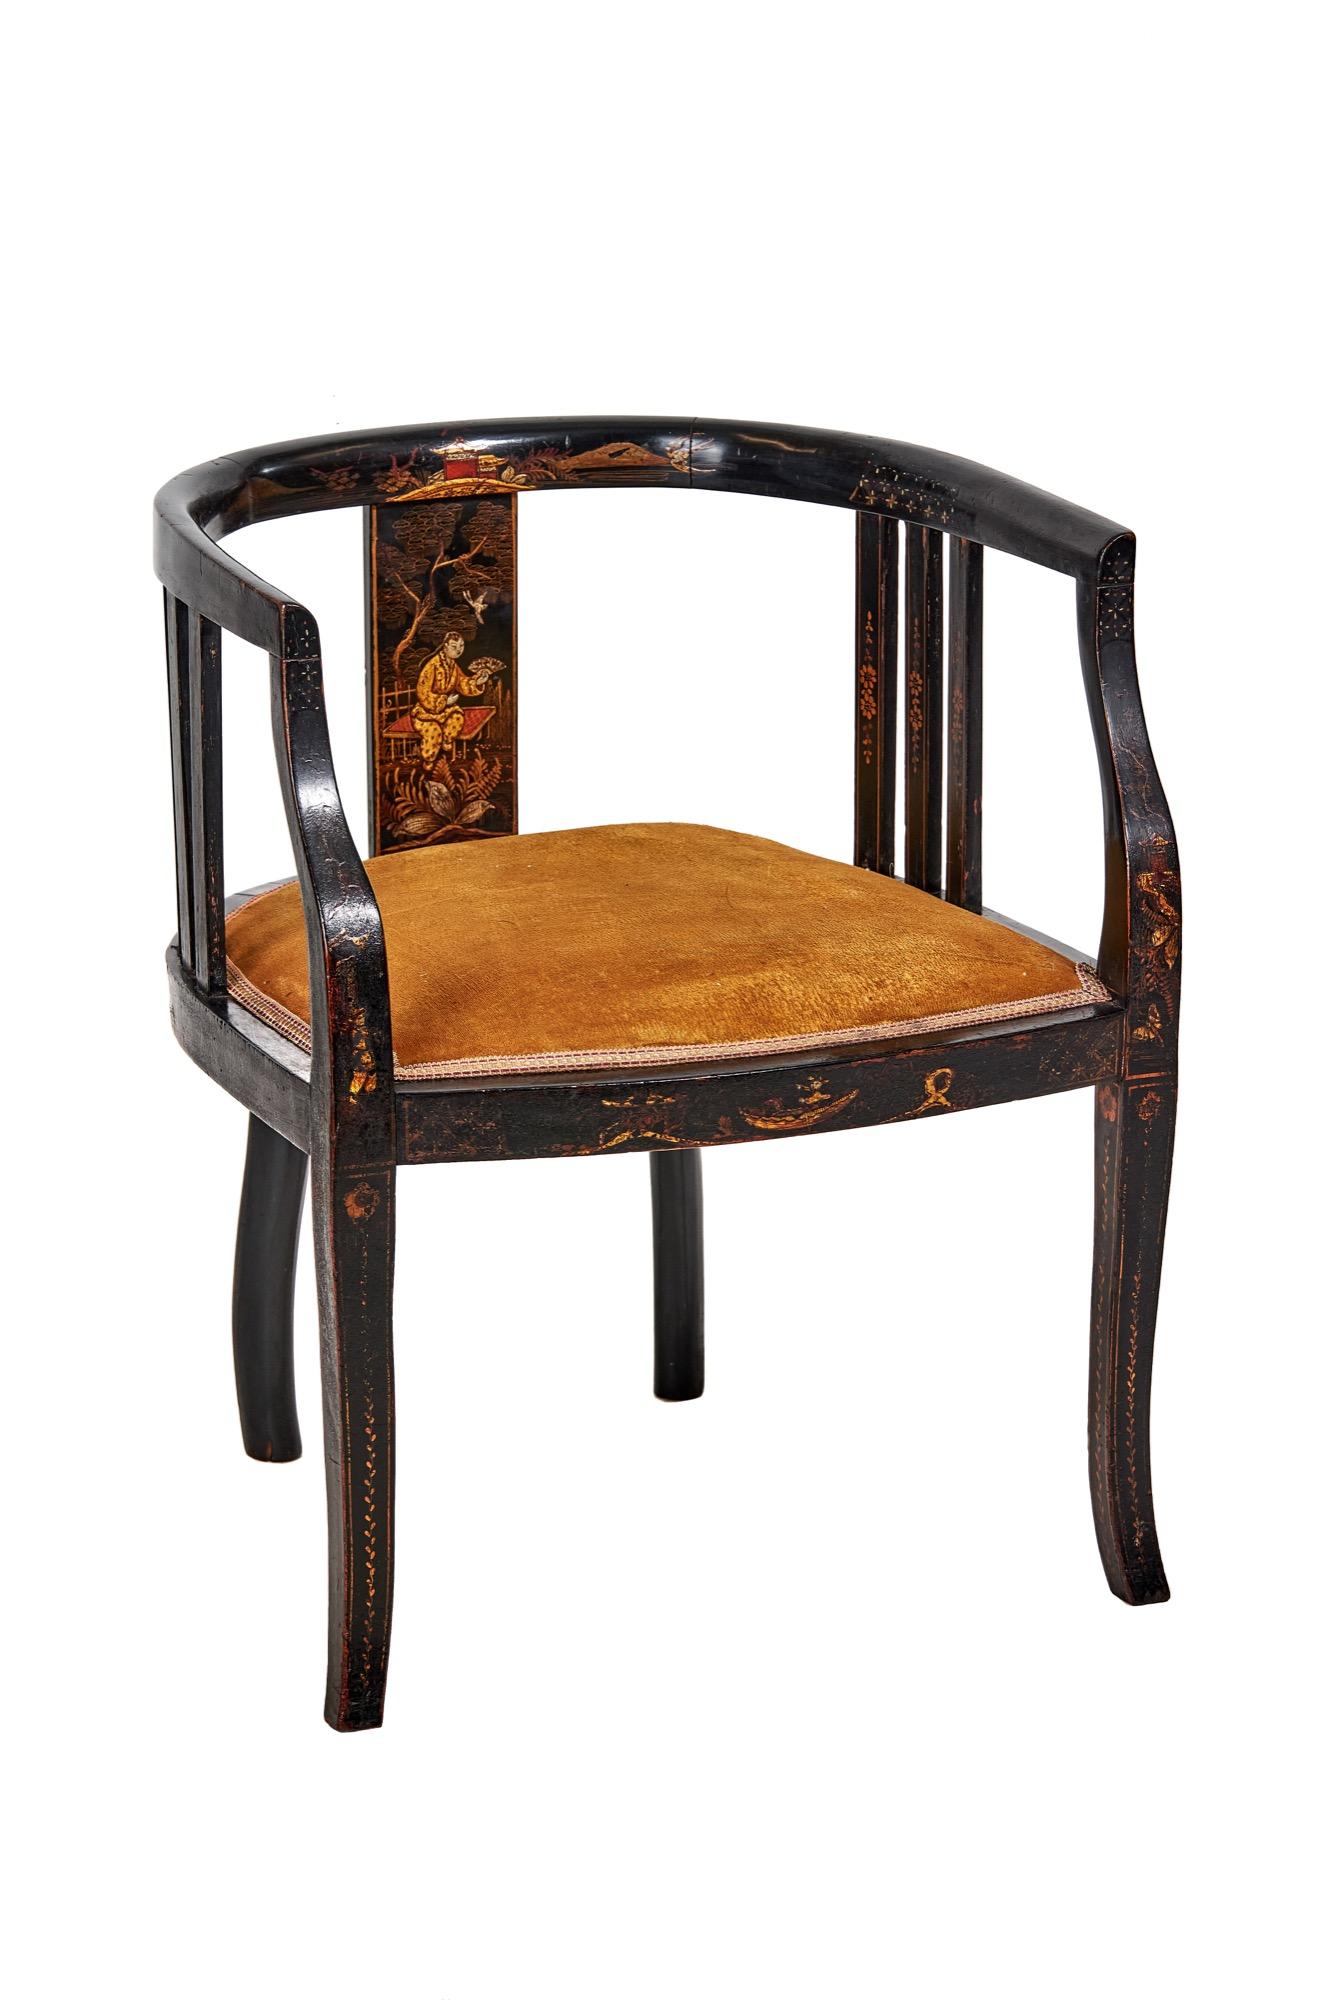 chinoiserie decorated bowback desk chair, circa 1930s
Bow-shaped back, 
Single splat at back, 
With 3 rails on each side,
All the chair frame 
Decorated with: Birds, foliage, figure, trees & house
Upholstered seat,
Shaped Back legs, 
Splayed